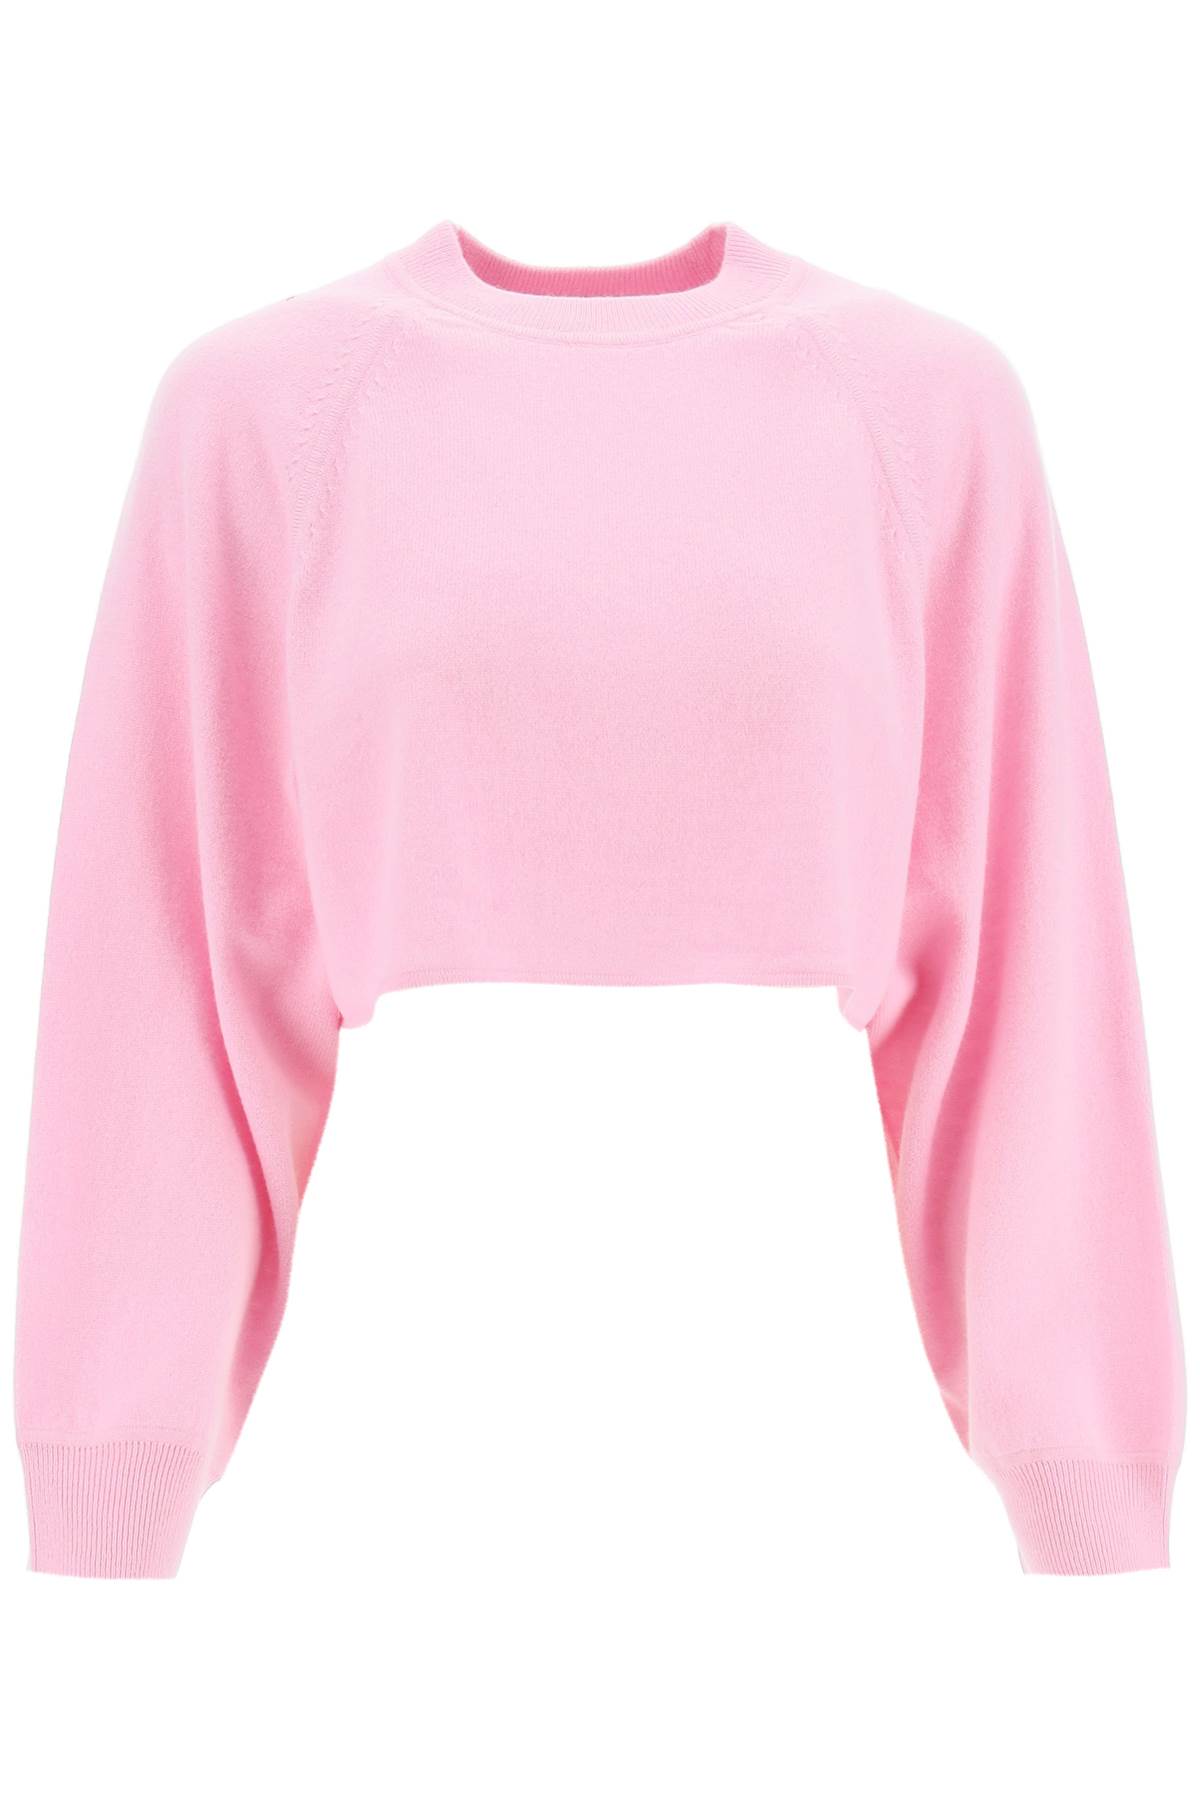 Loulou Studio bocas Cashmere Cropped Sweater